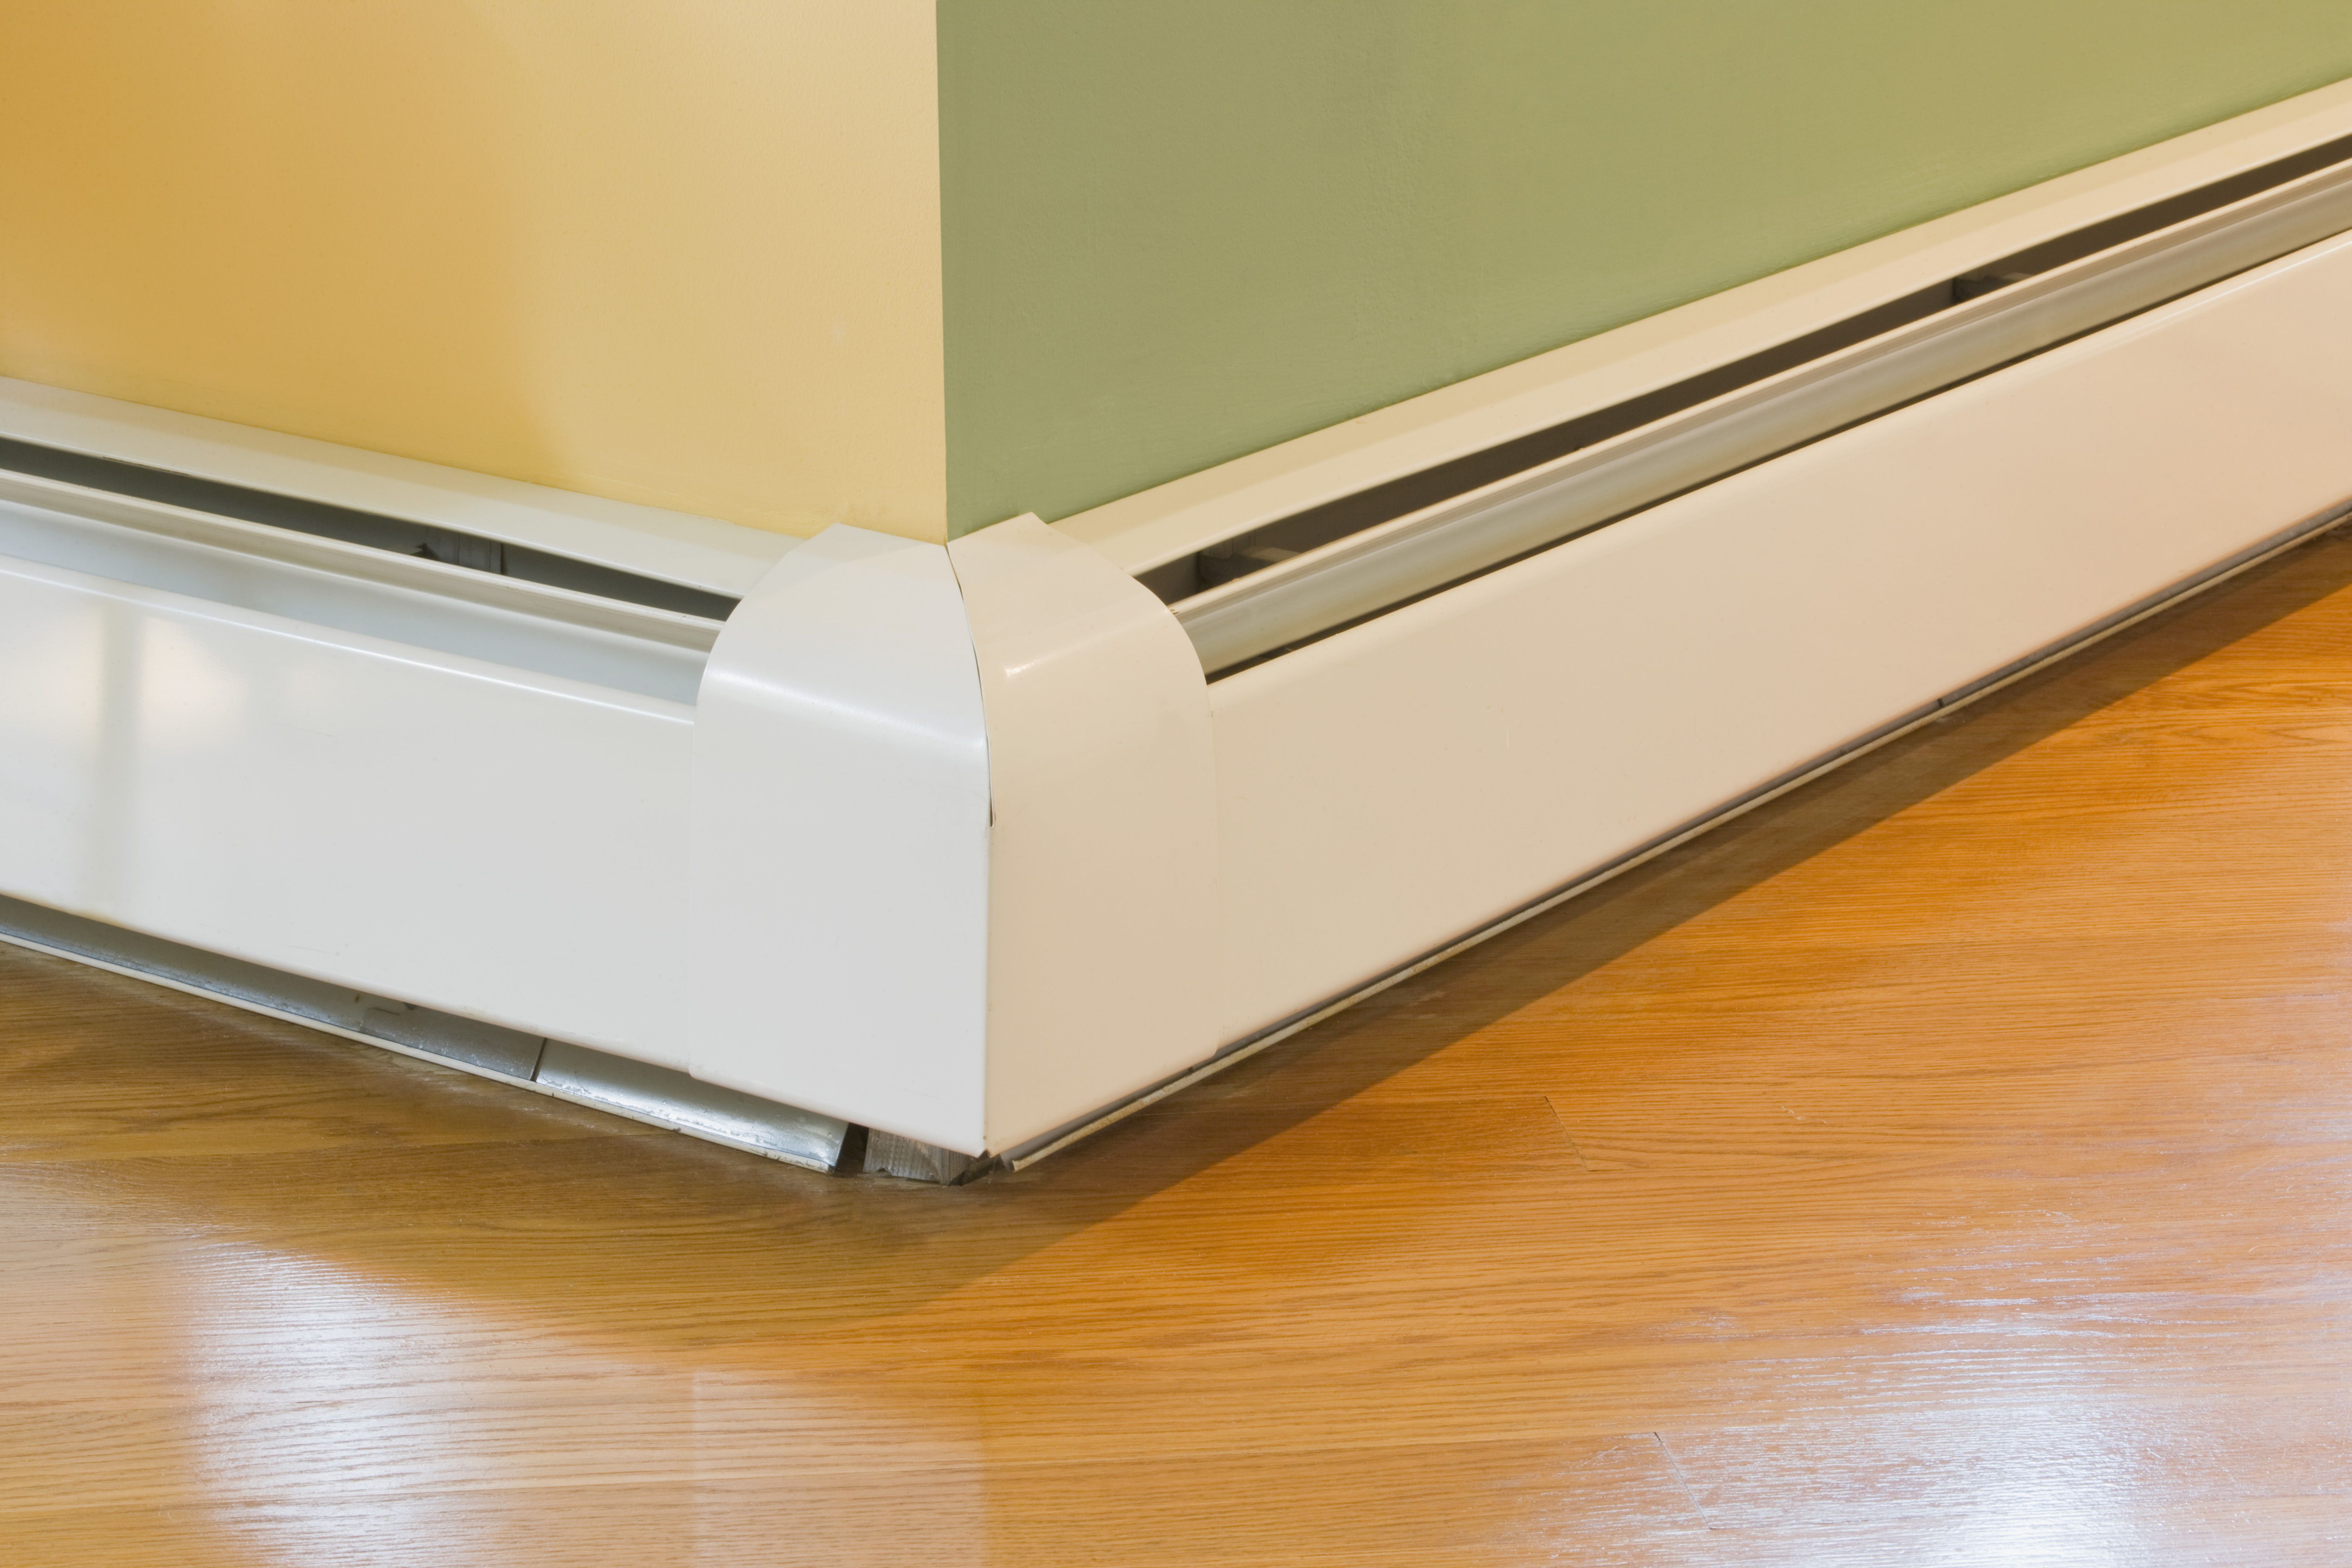 Baseboard Heaters How To Install a Baseboard Heater